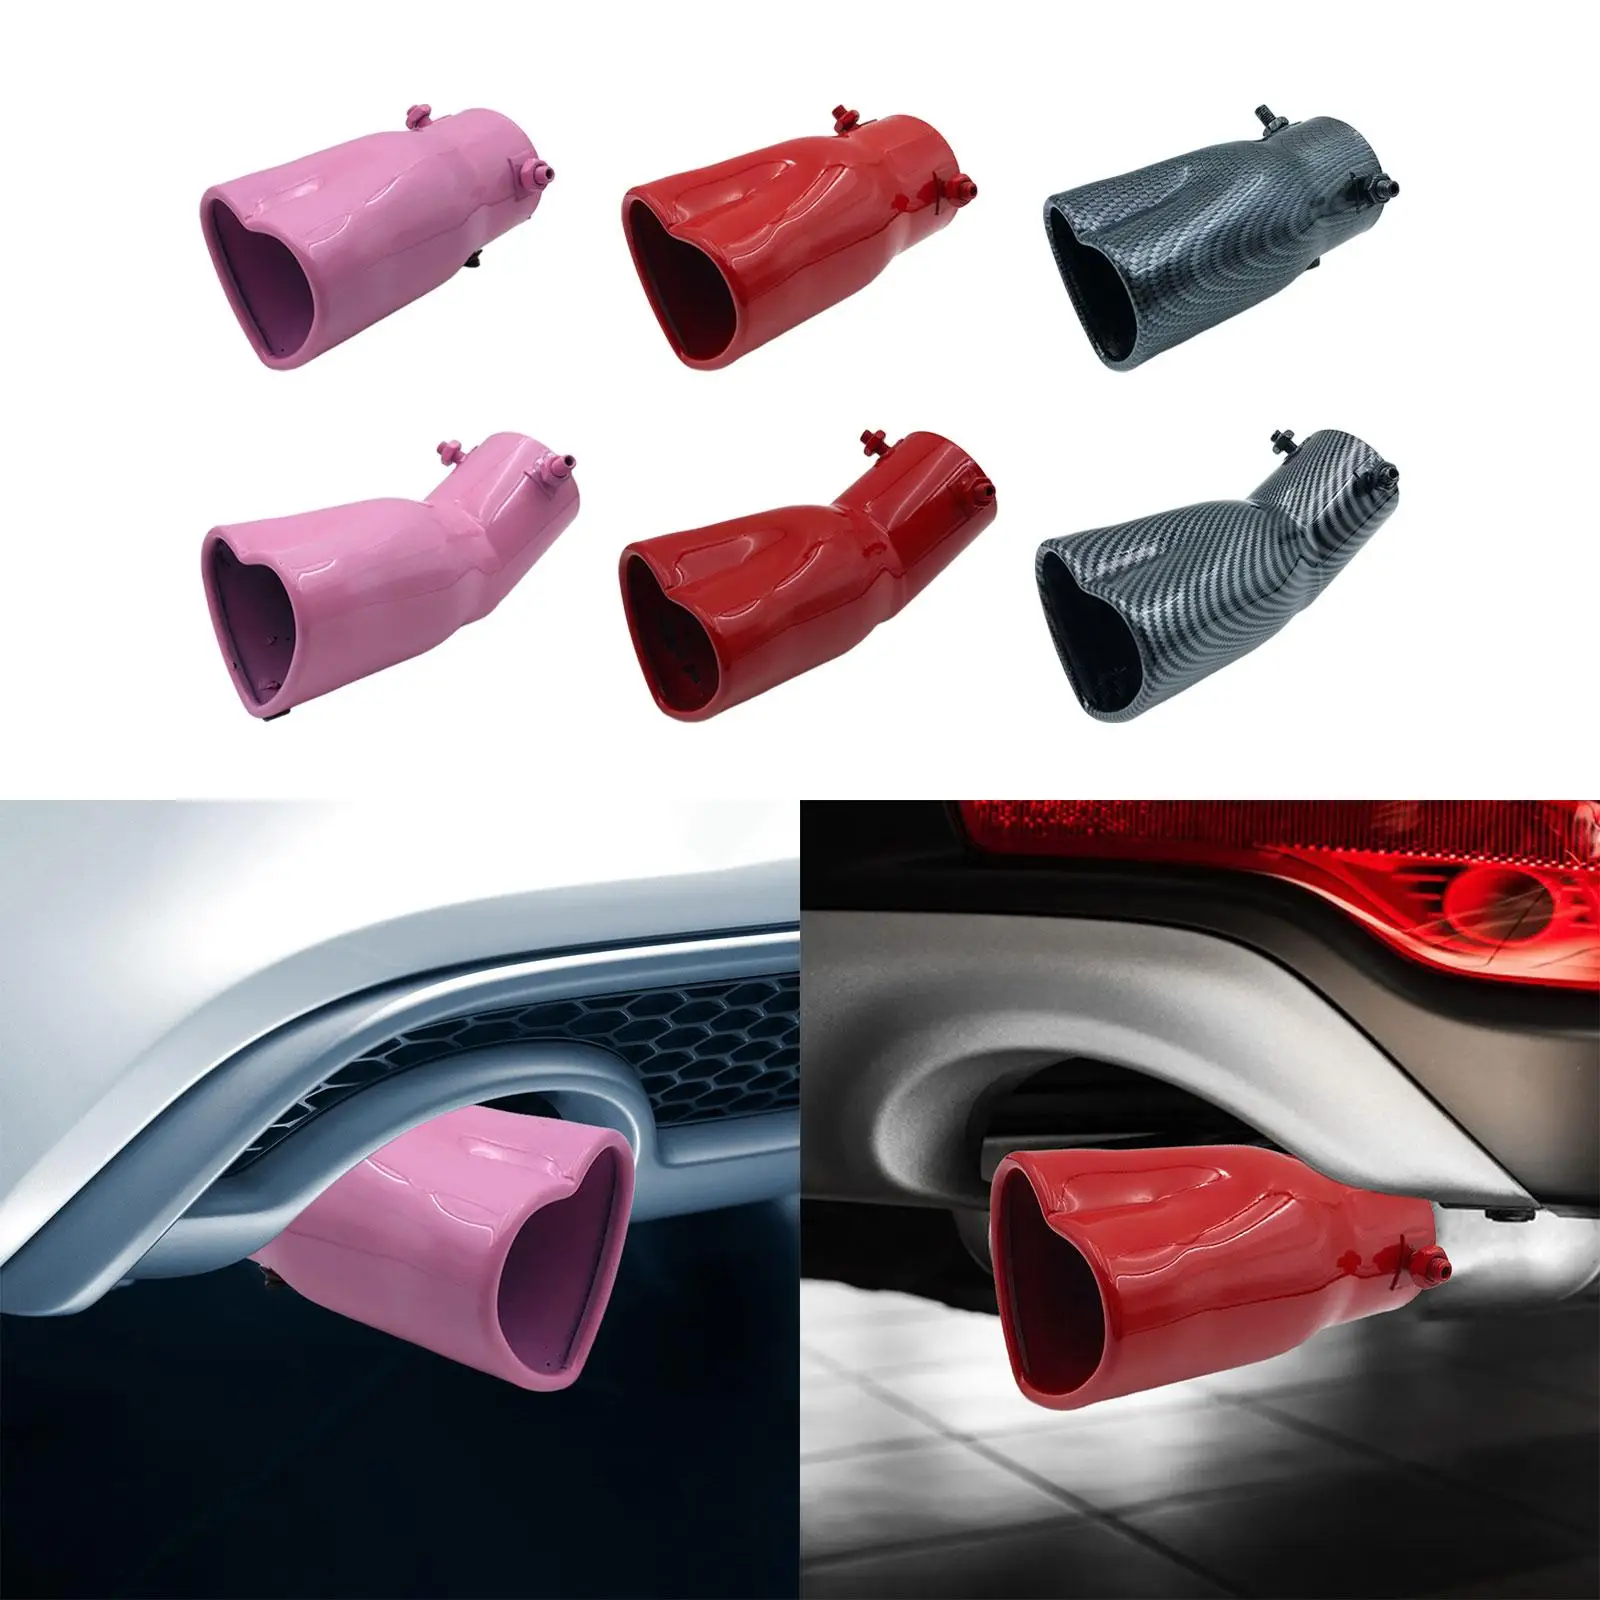 Exhaust Muffler Car Modified Tail Throat Tail Pipe for SUV Car Vehicles